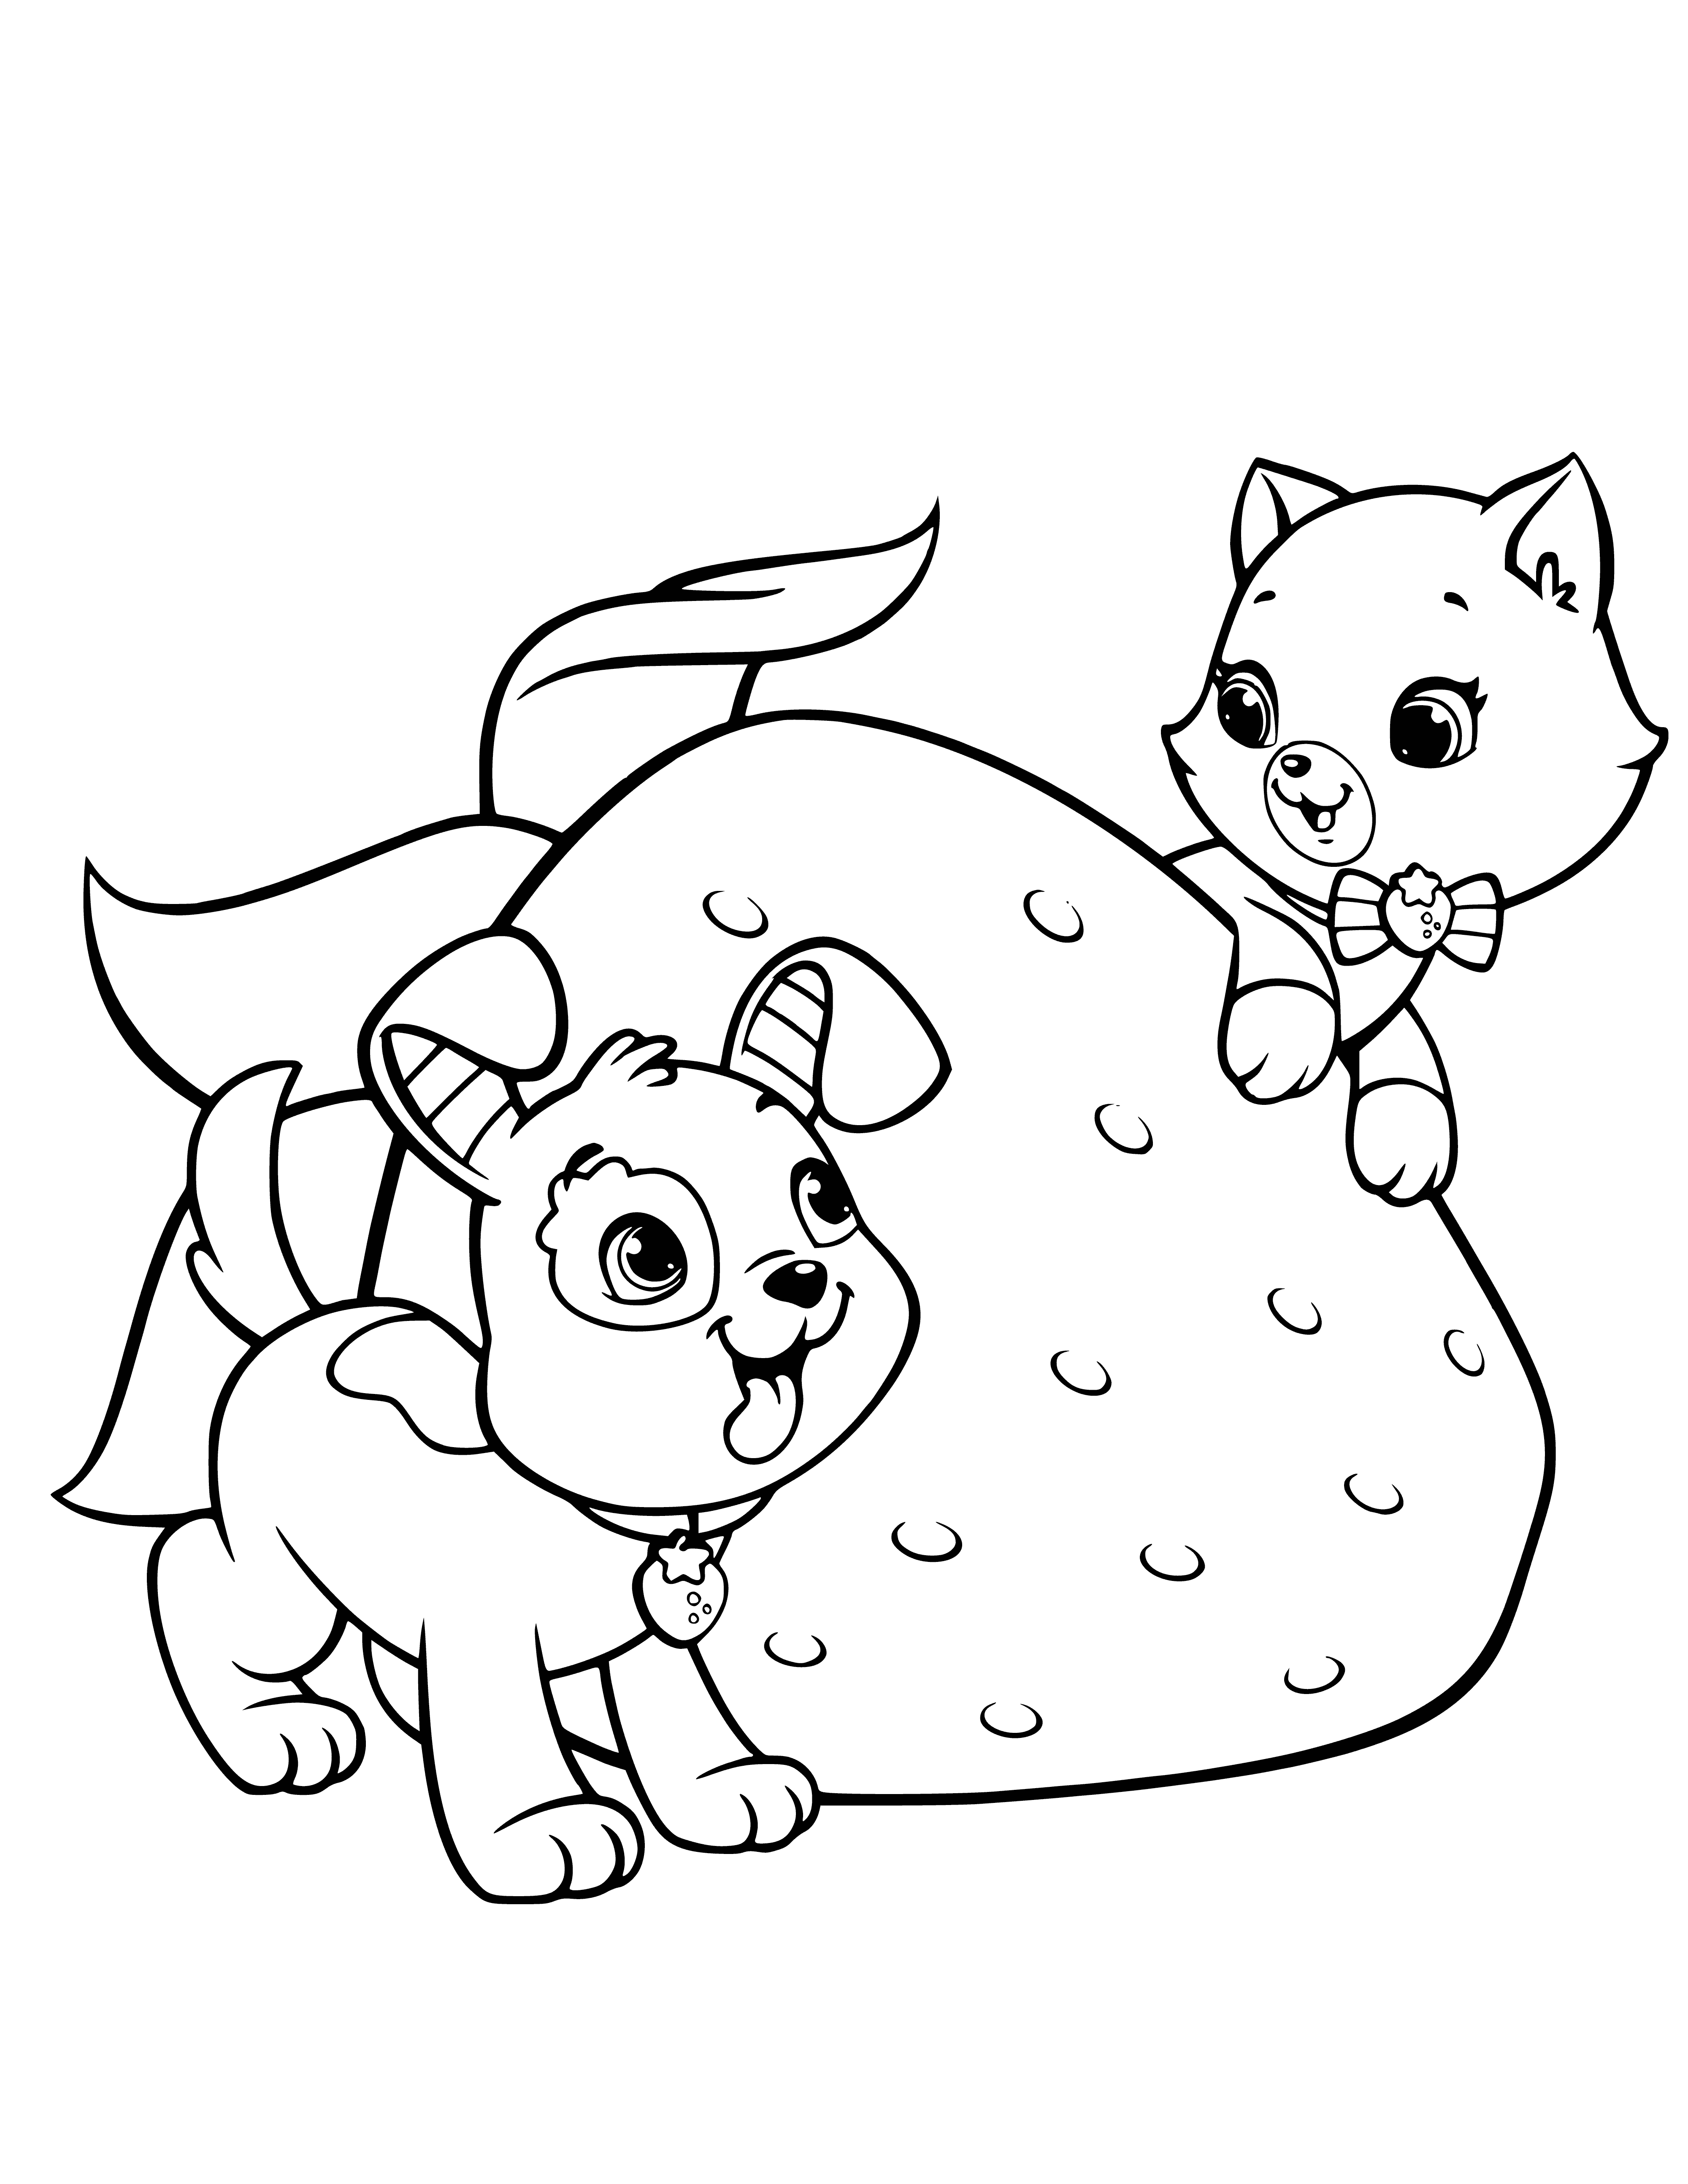 coloring page: White puppy & orange kitten face viewer in a grassy patch surrounded by pink flowers. The pup has a pink collar & strawberry on its head, while the kitten has a green bow in its hair.